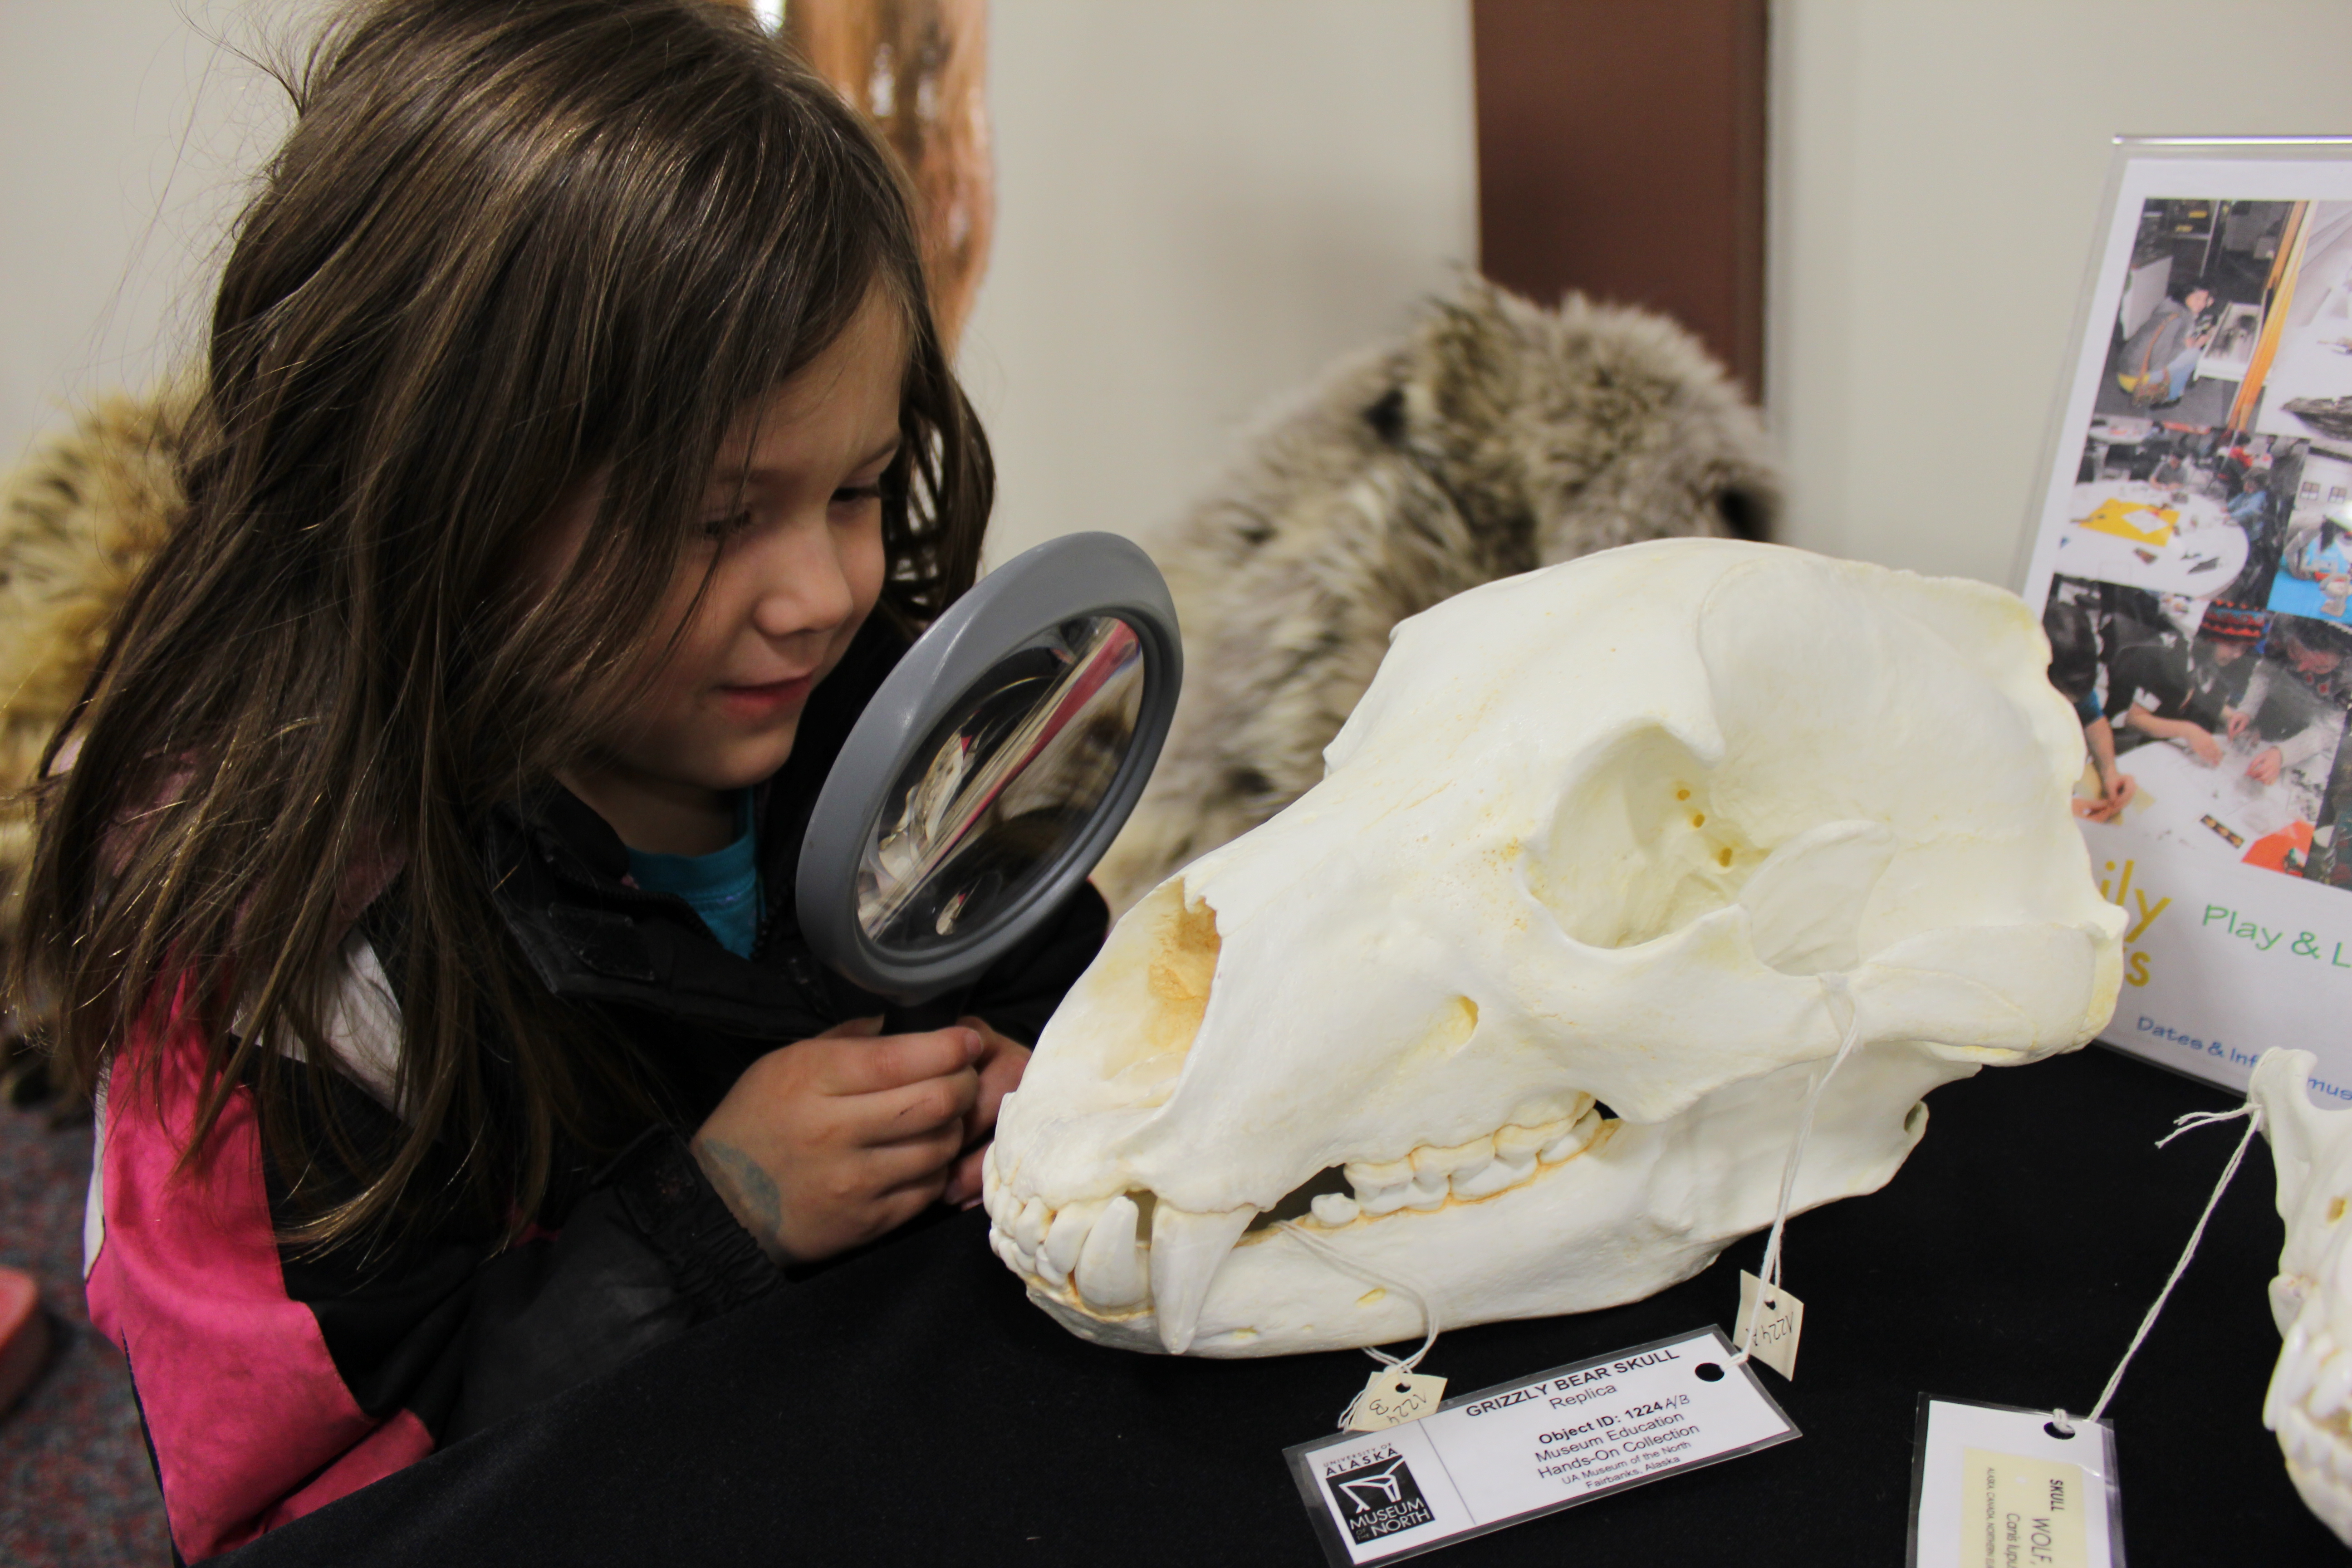 Photo by Peggy Hetman. After-school volunteers can help bring museum specimens to local kids at the University of Alaska Museum of the North.